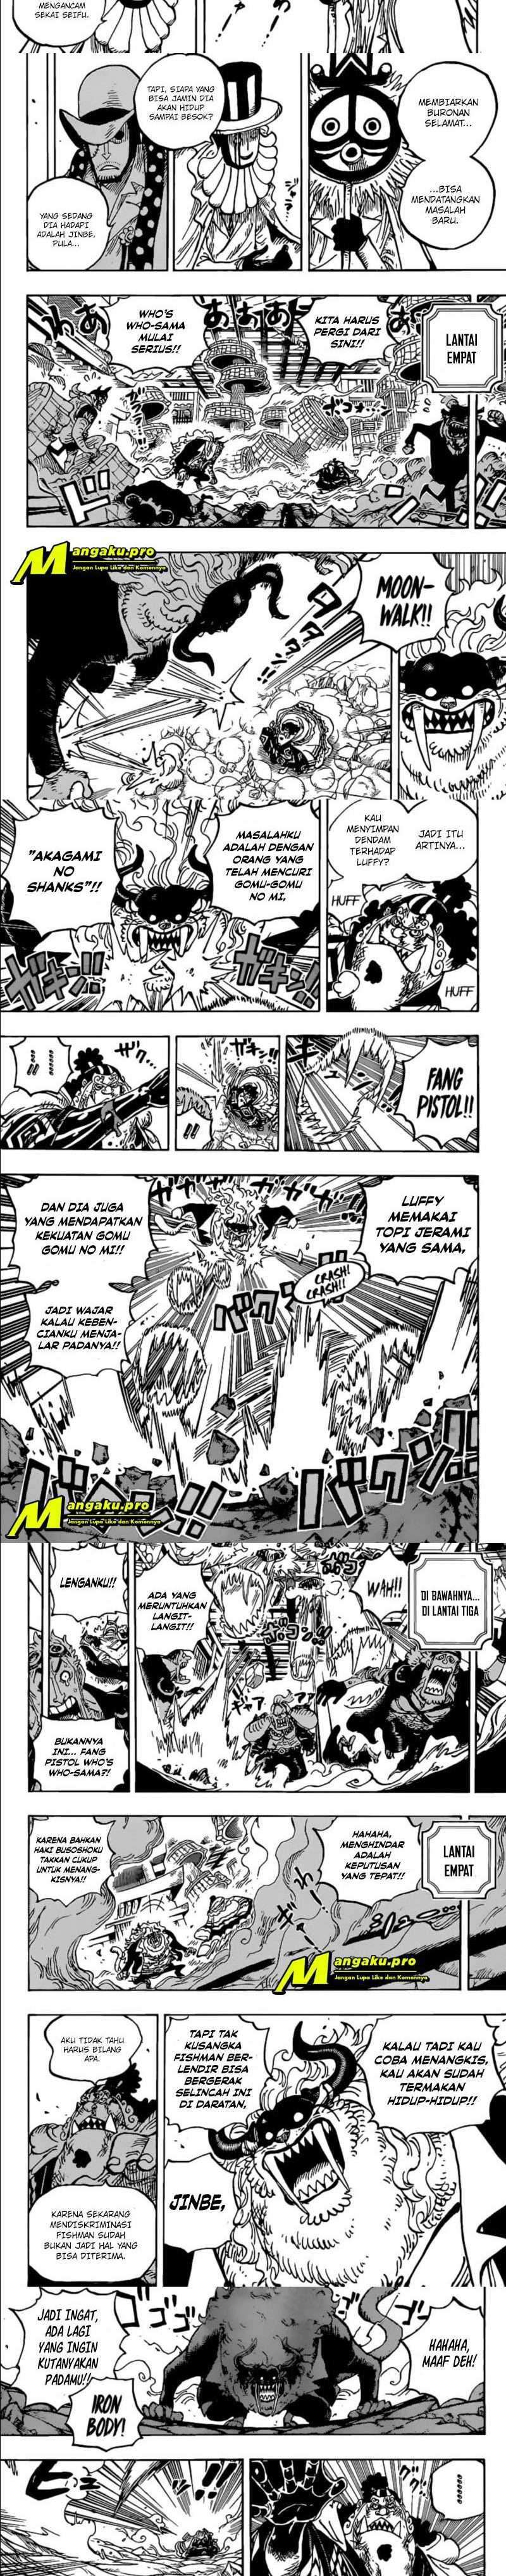 One Piece Chapter 1018 Hq - 33